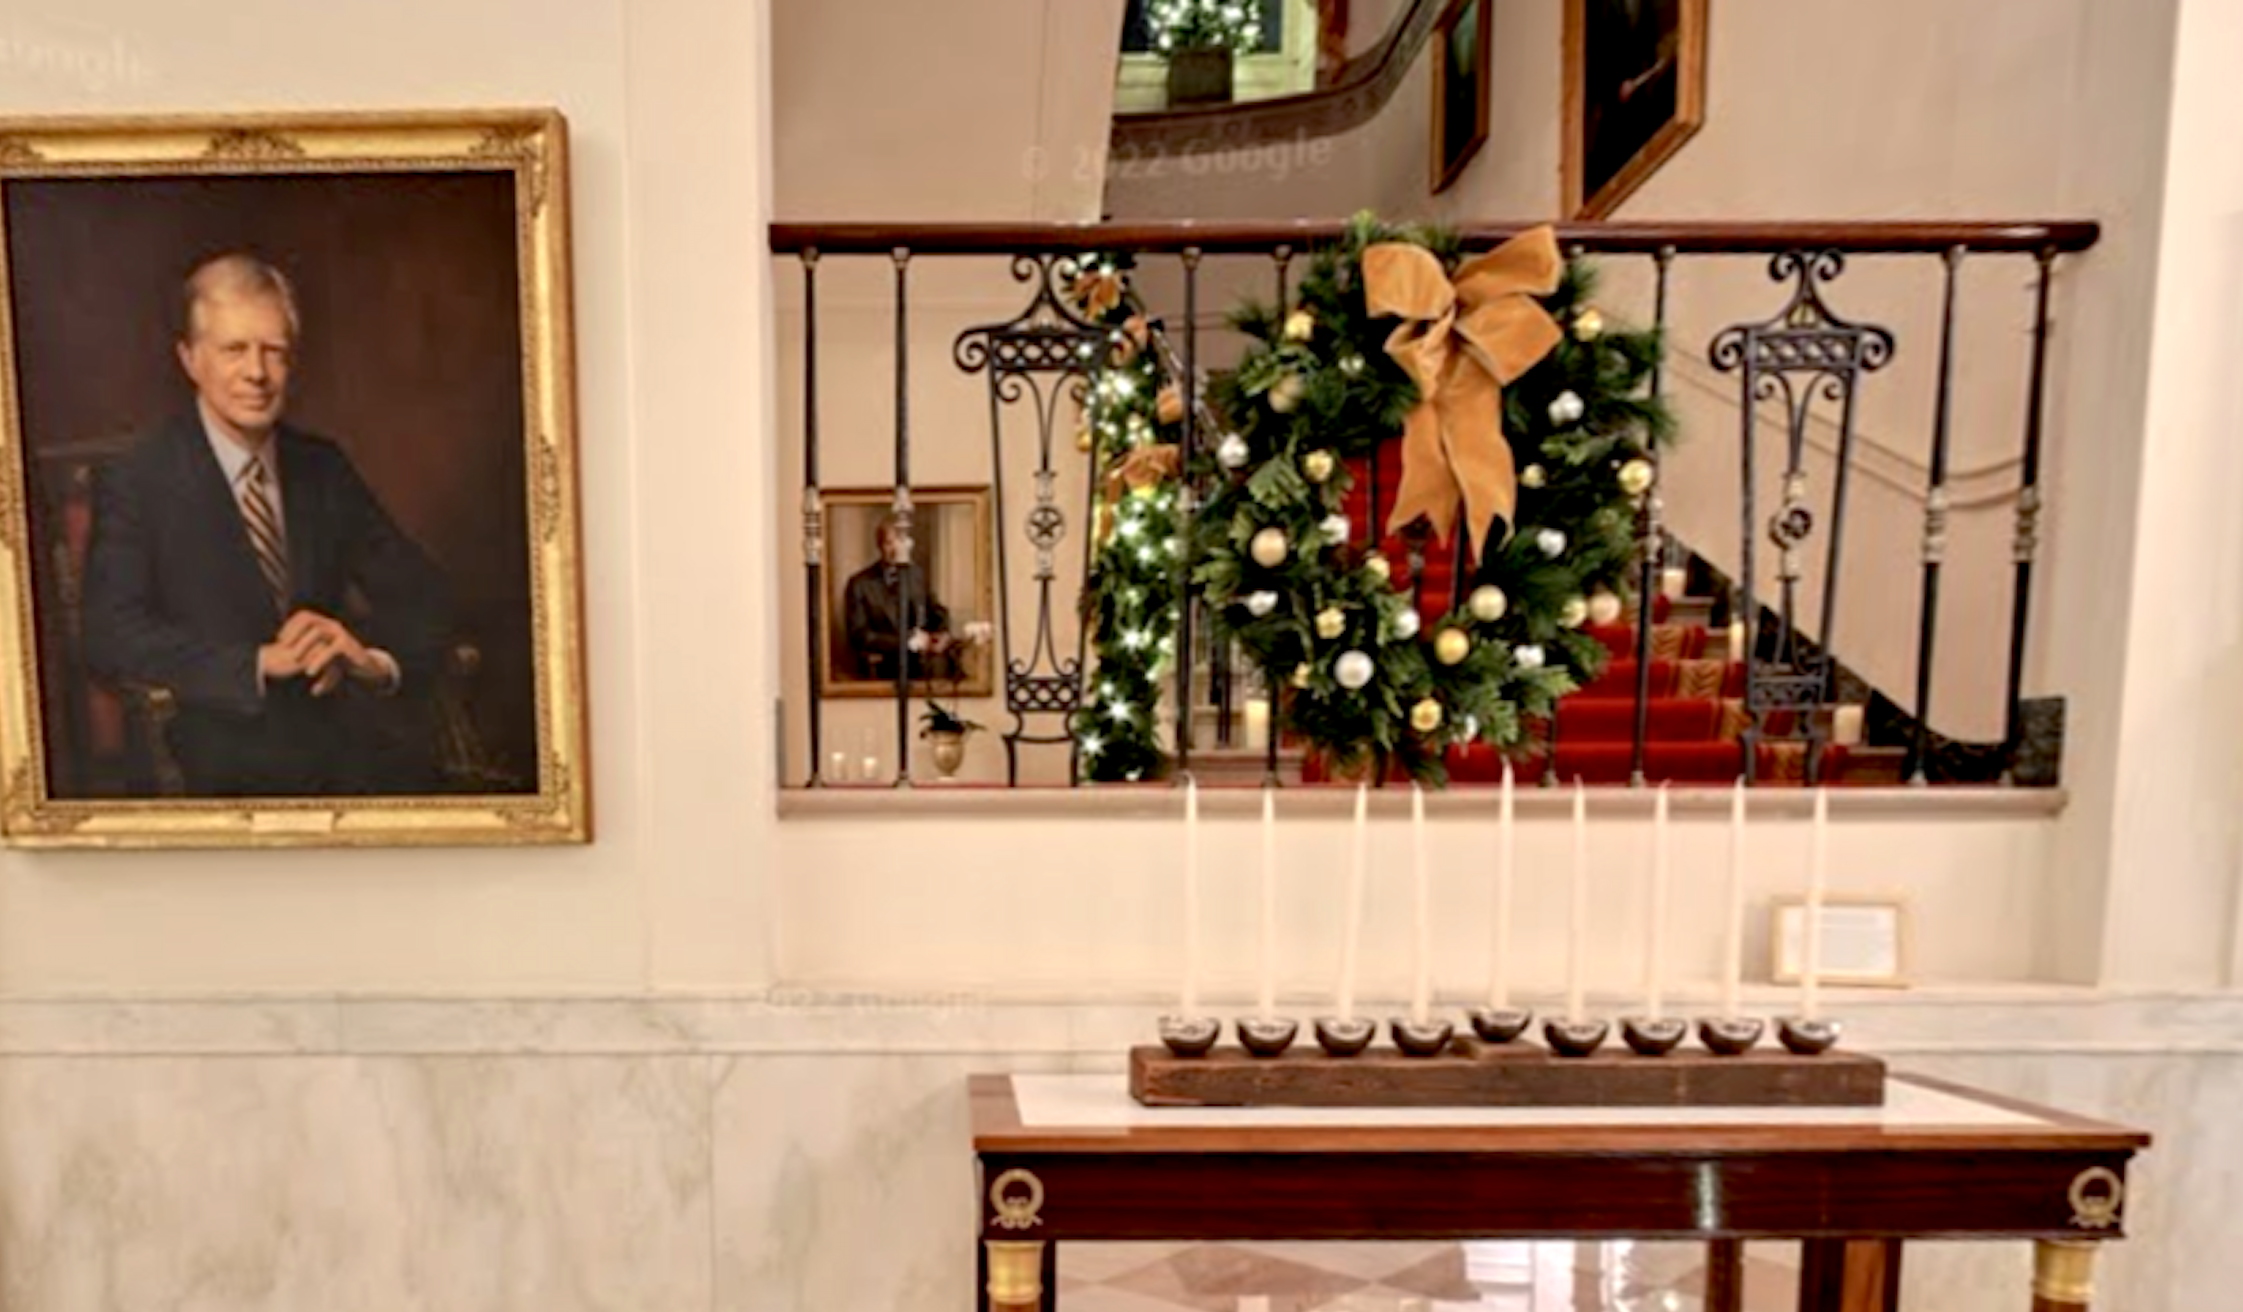 White House unveils Chanukah menorah as part of official Christmas decorations for first time